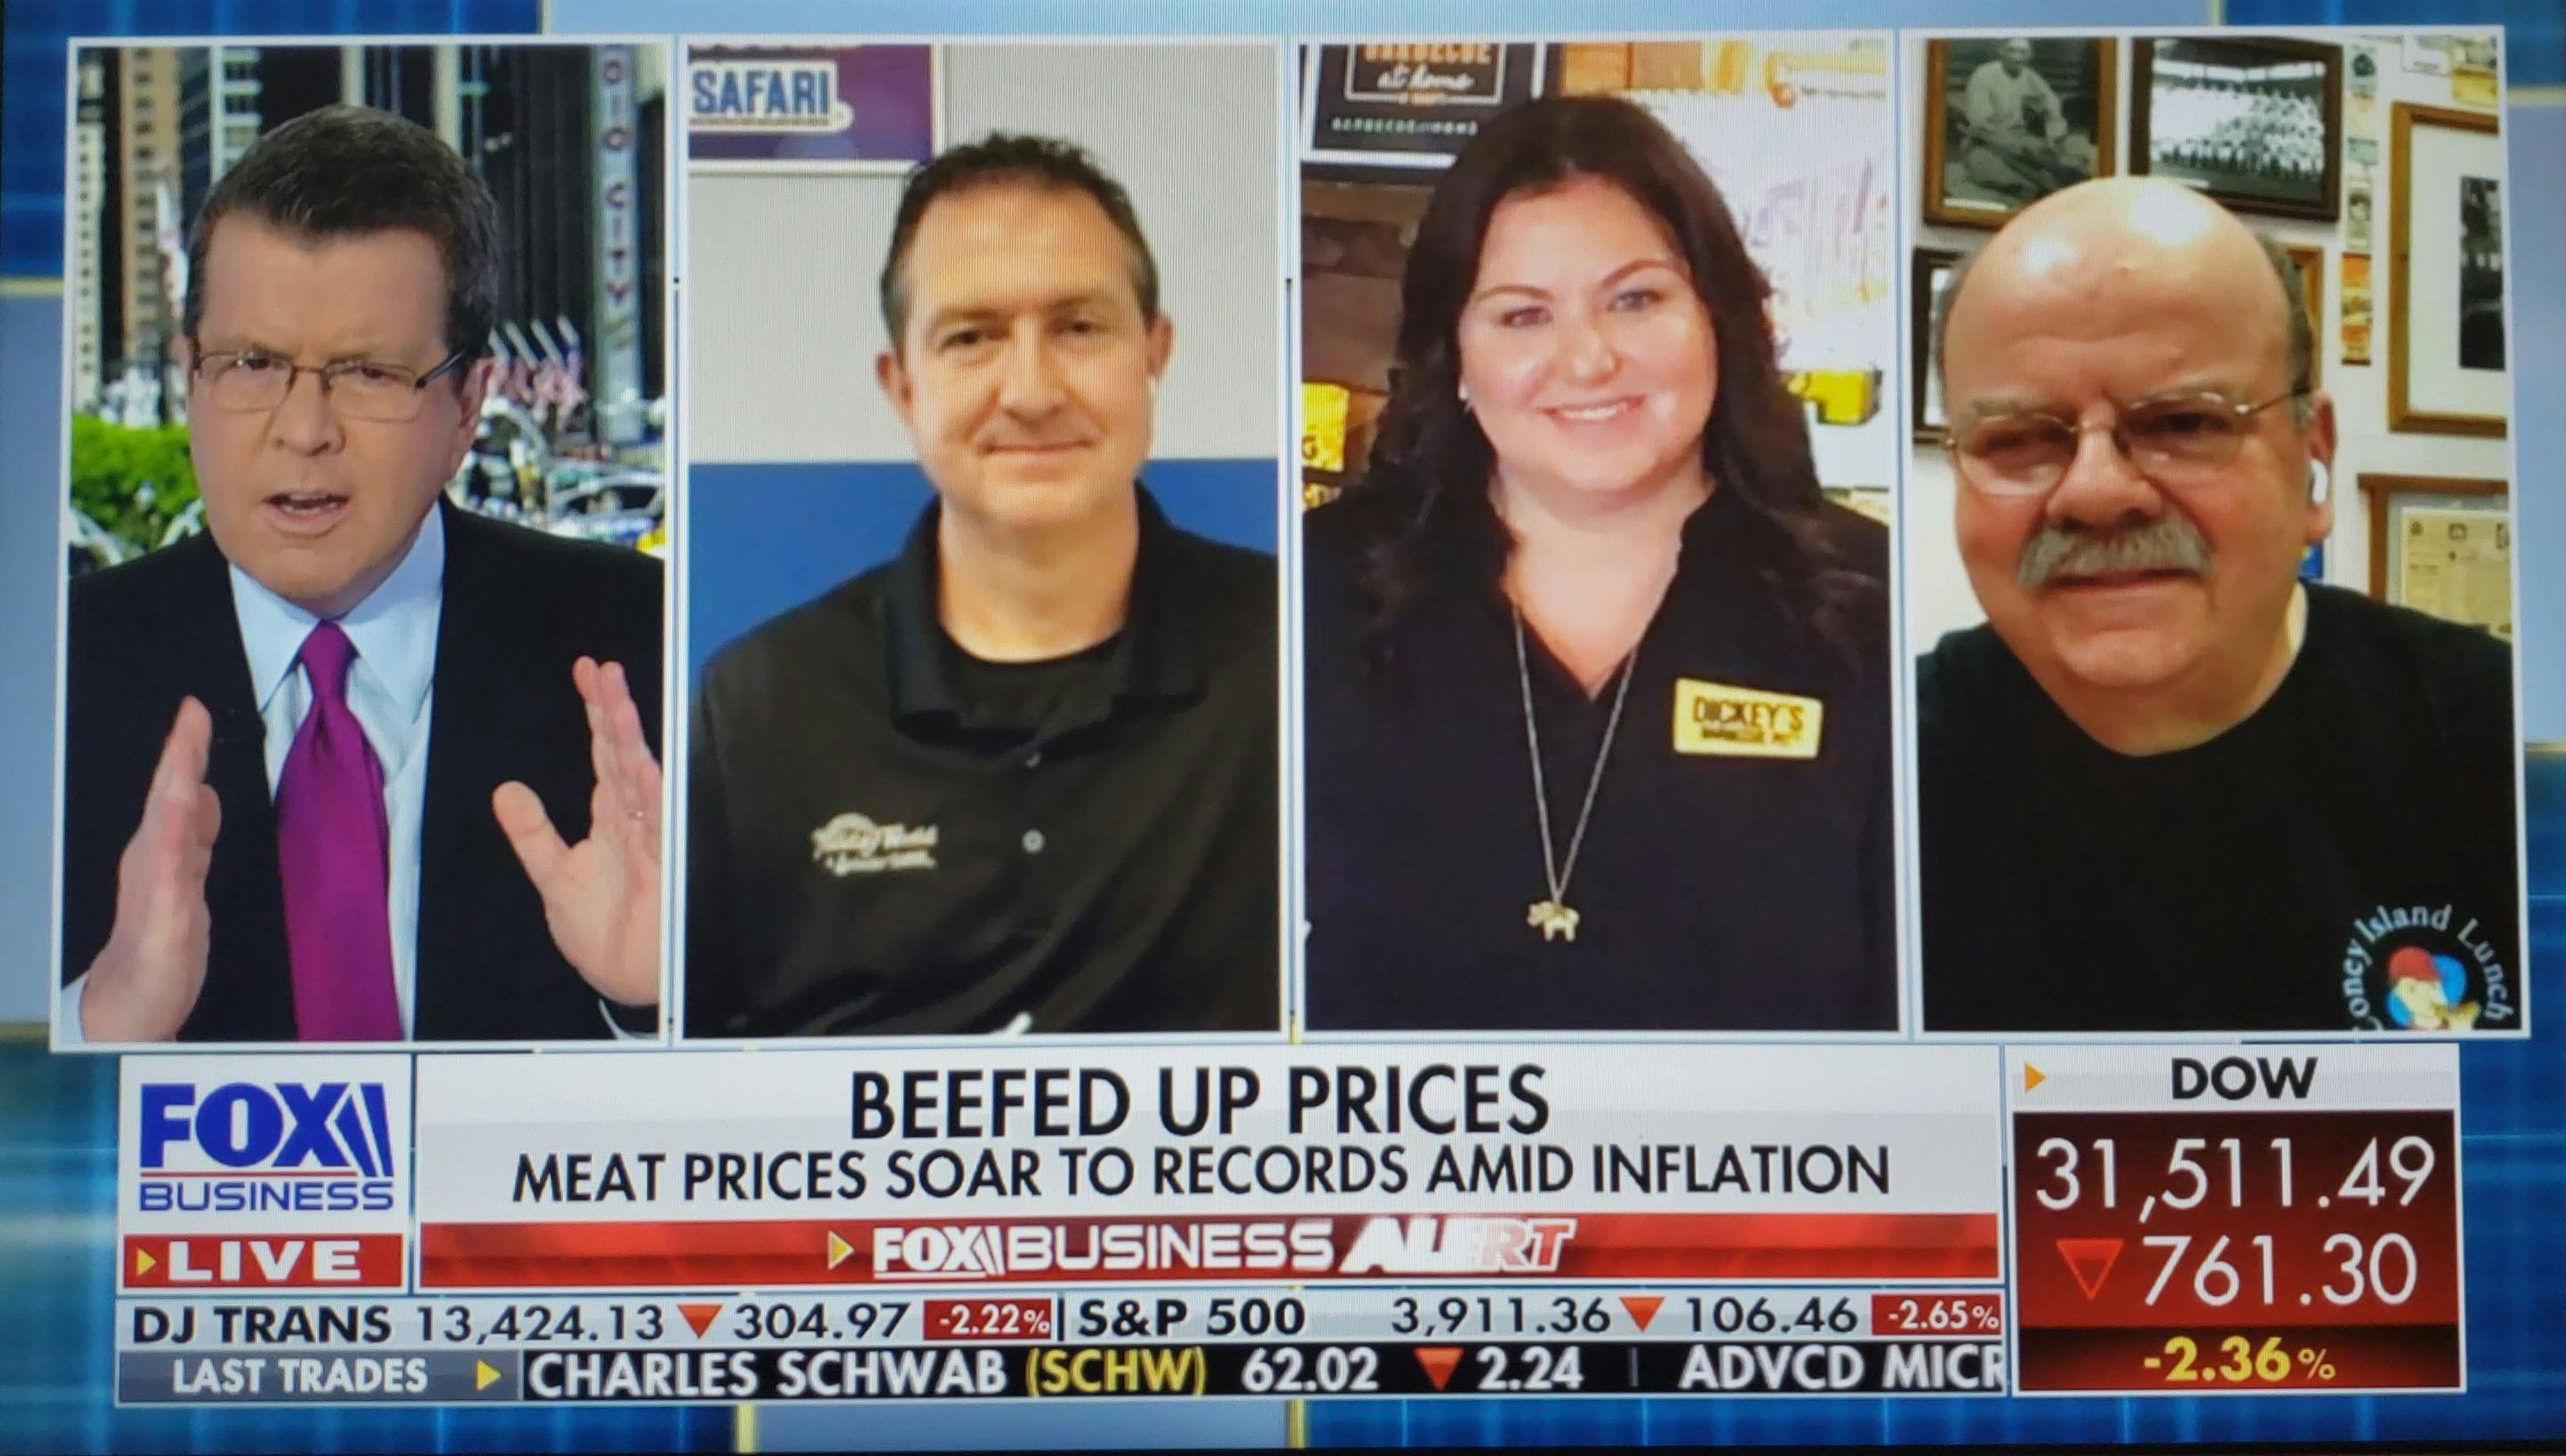 Dickey’s Barbecue Pit on Fox Business addressing concerns with inflation and fuel cost